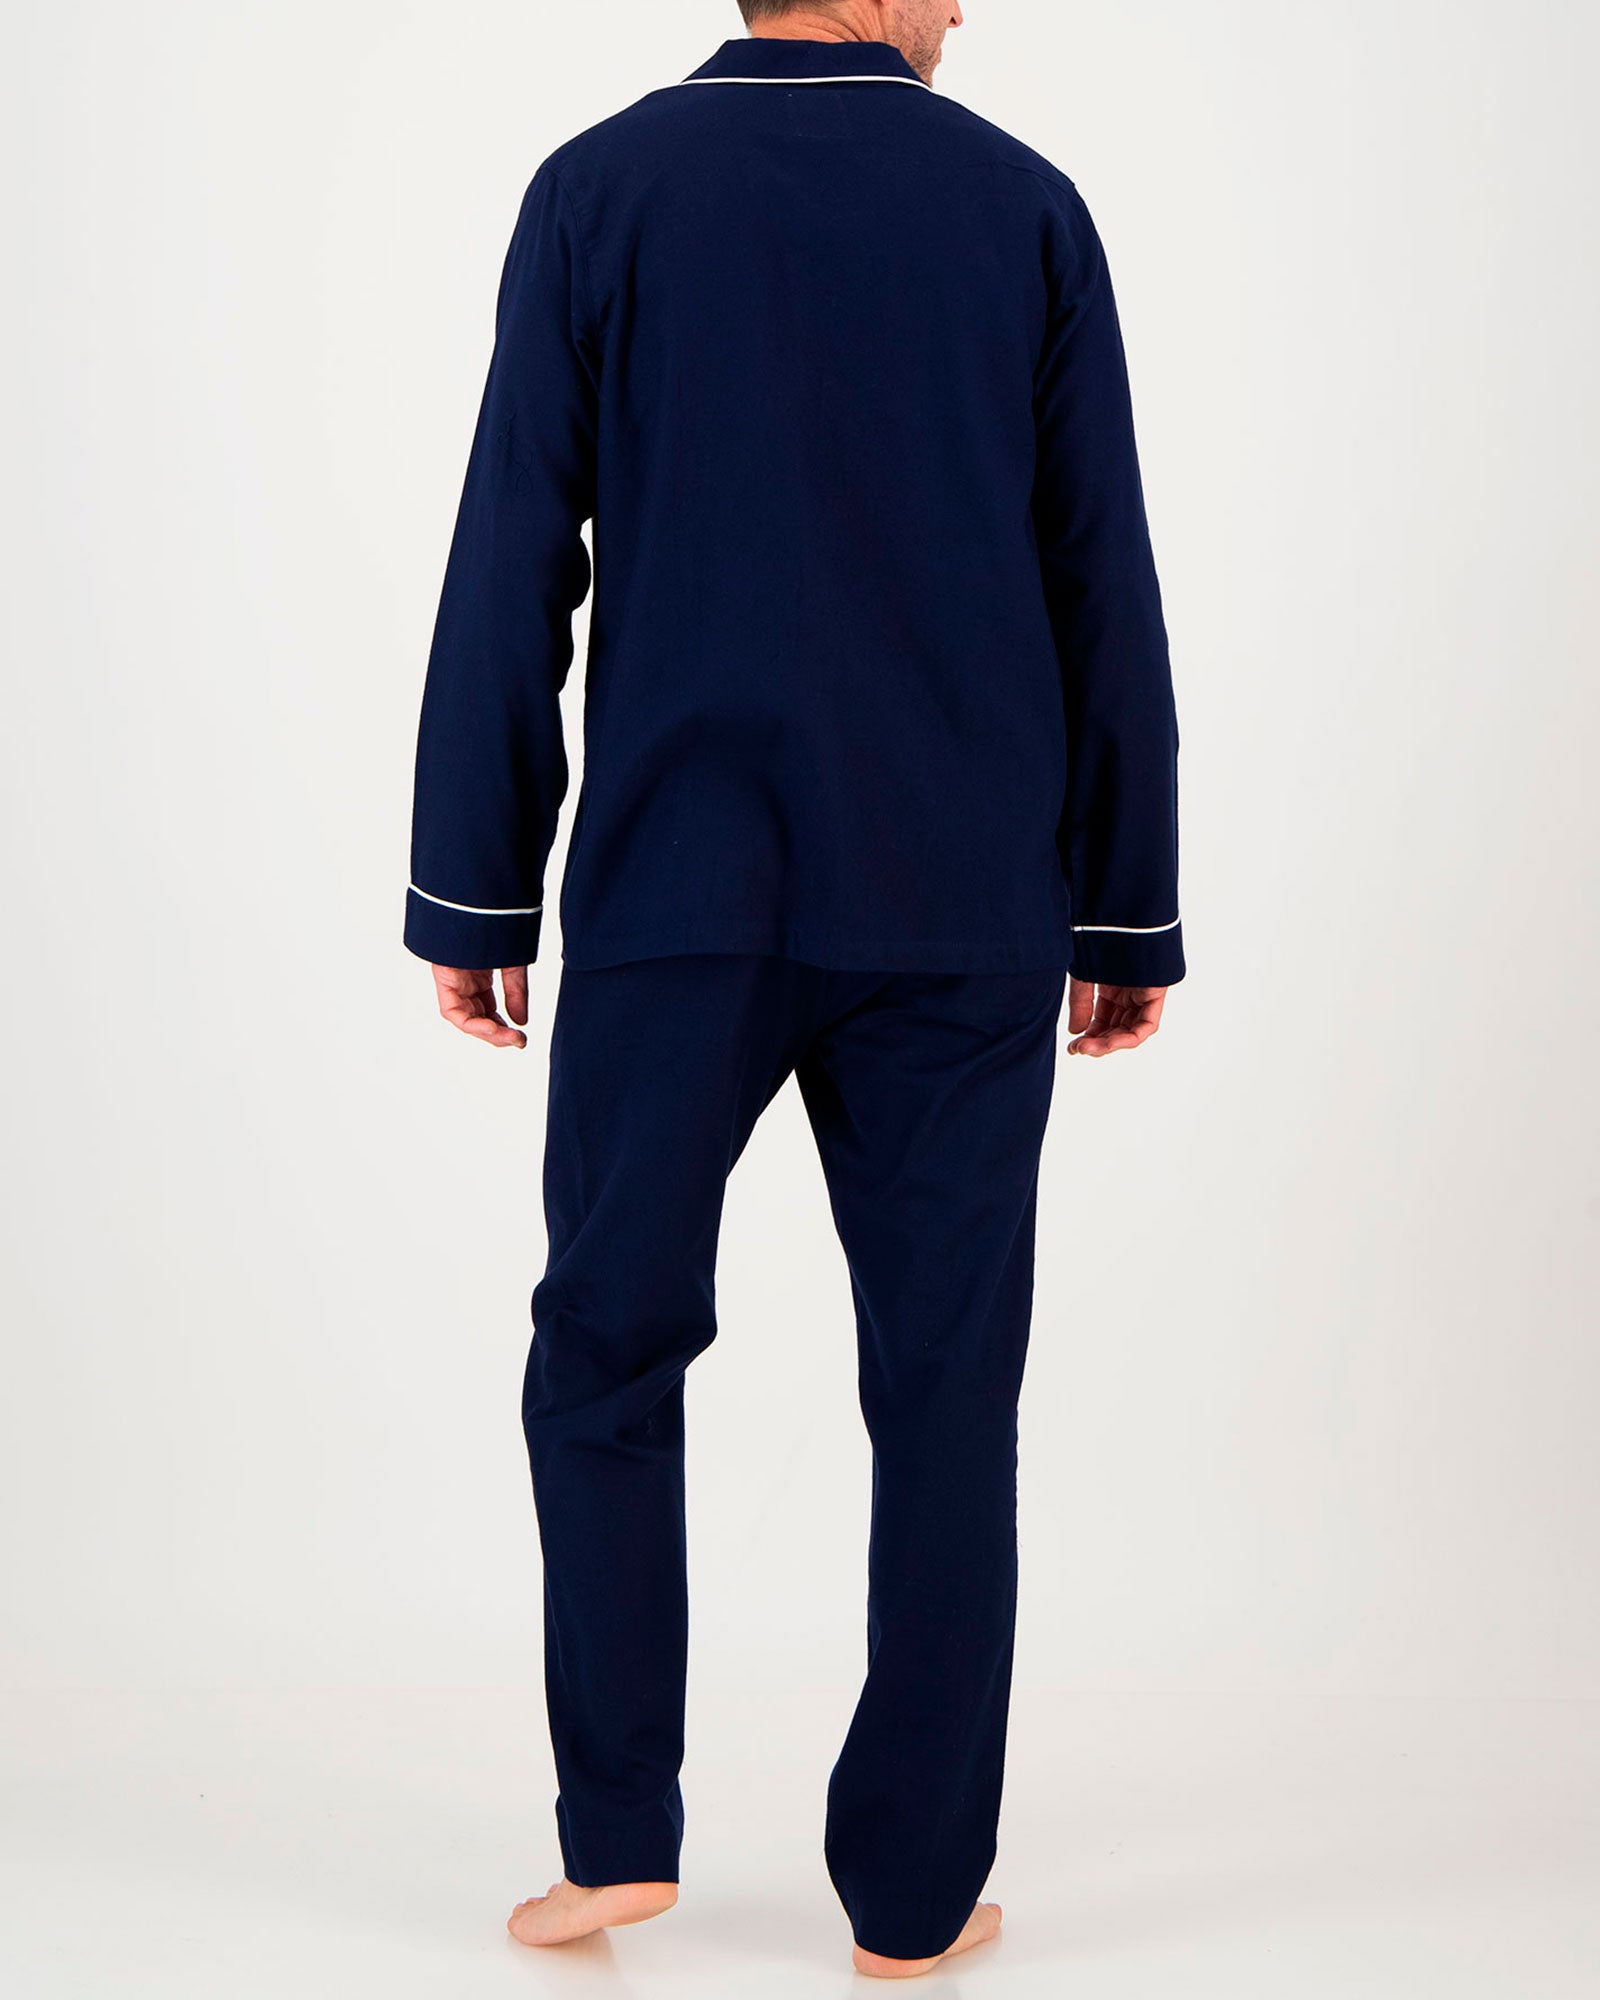 Mens Brushed Cotton Flannel Long Pyjamas in Navy with White Piping Back - Woodstock Laundry UK